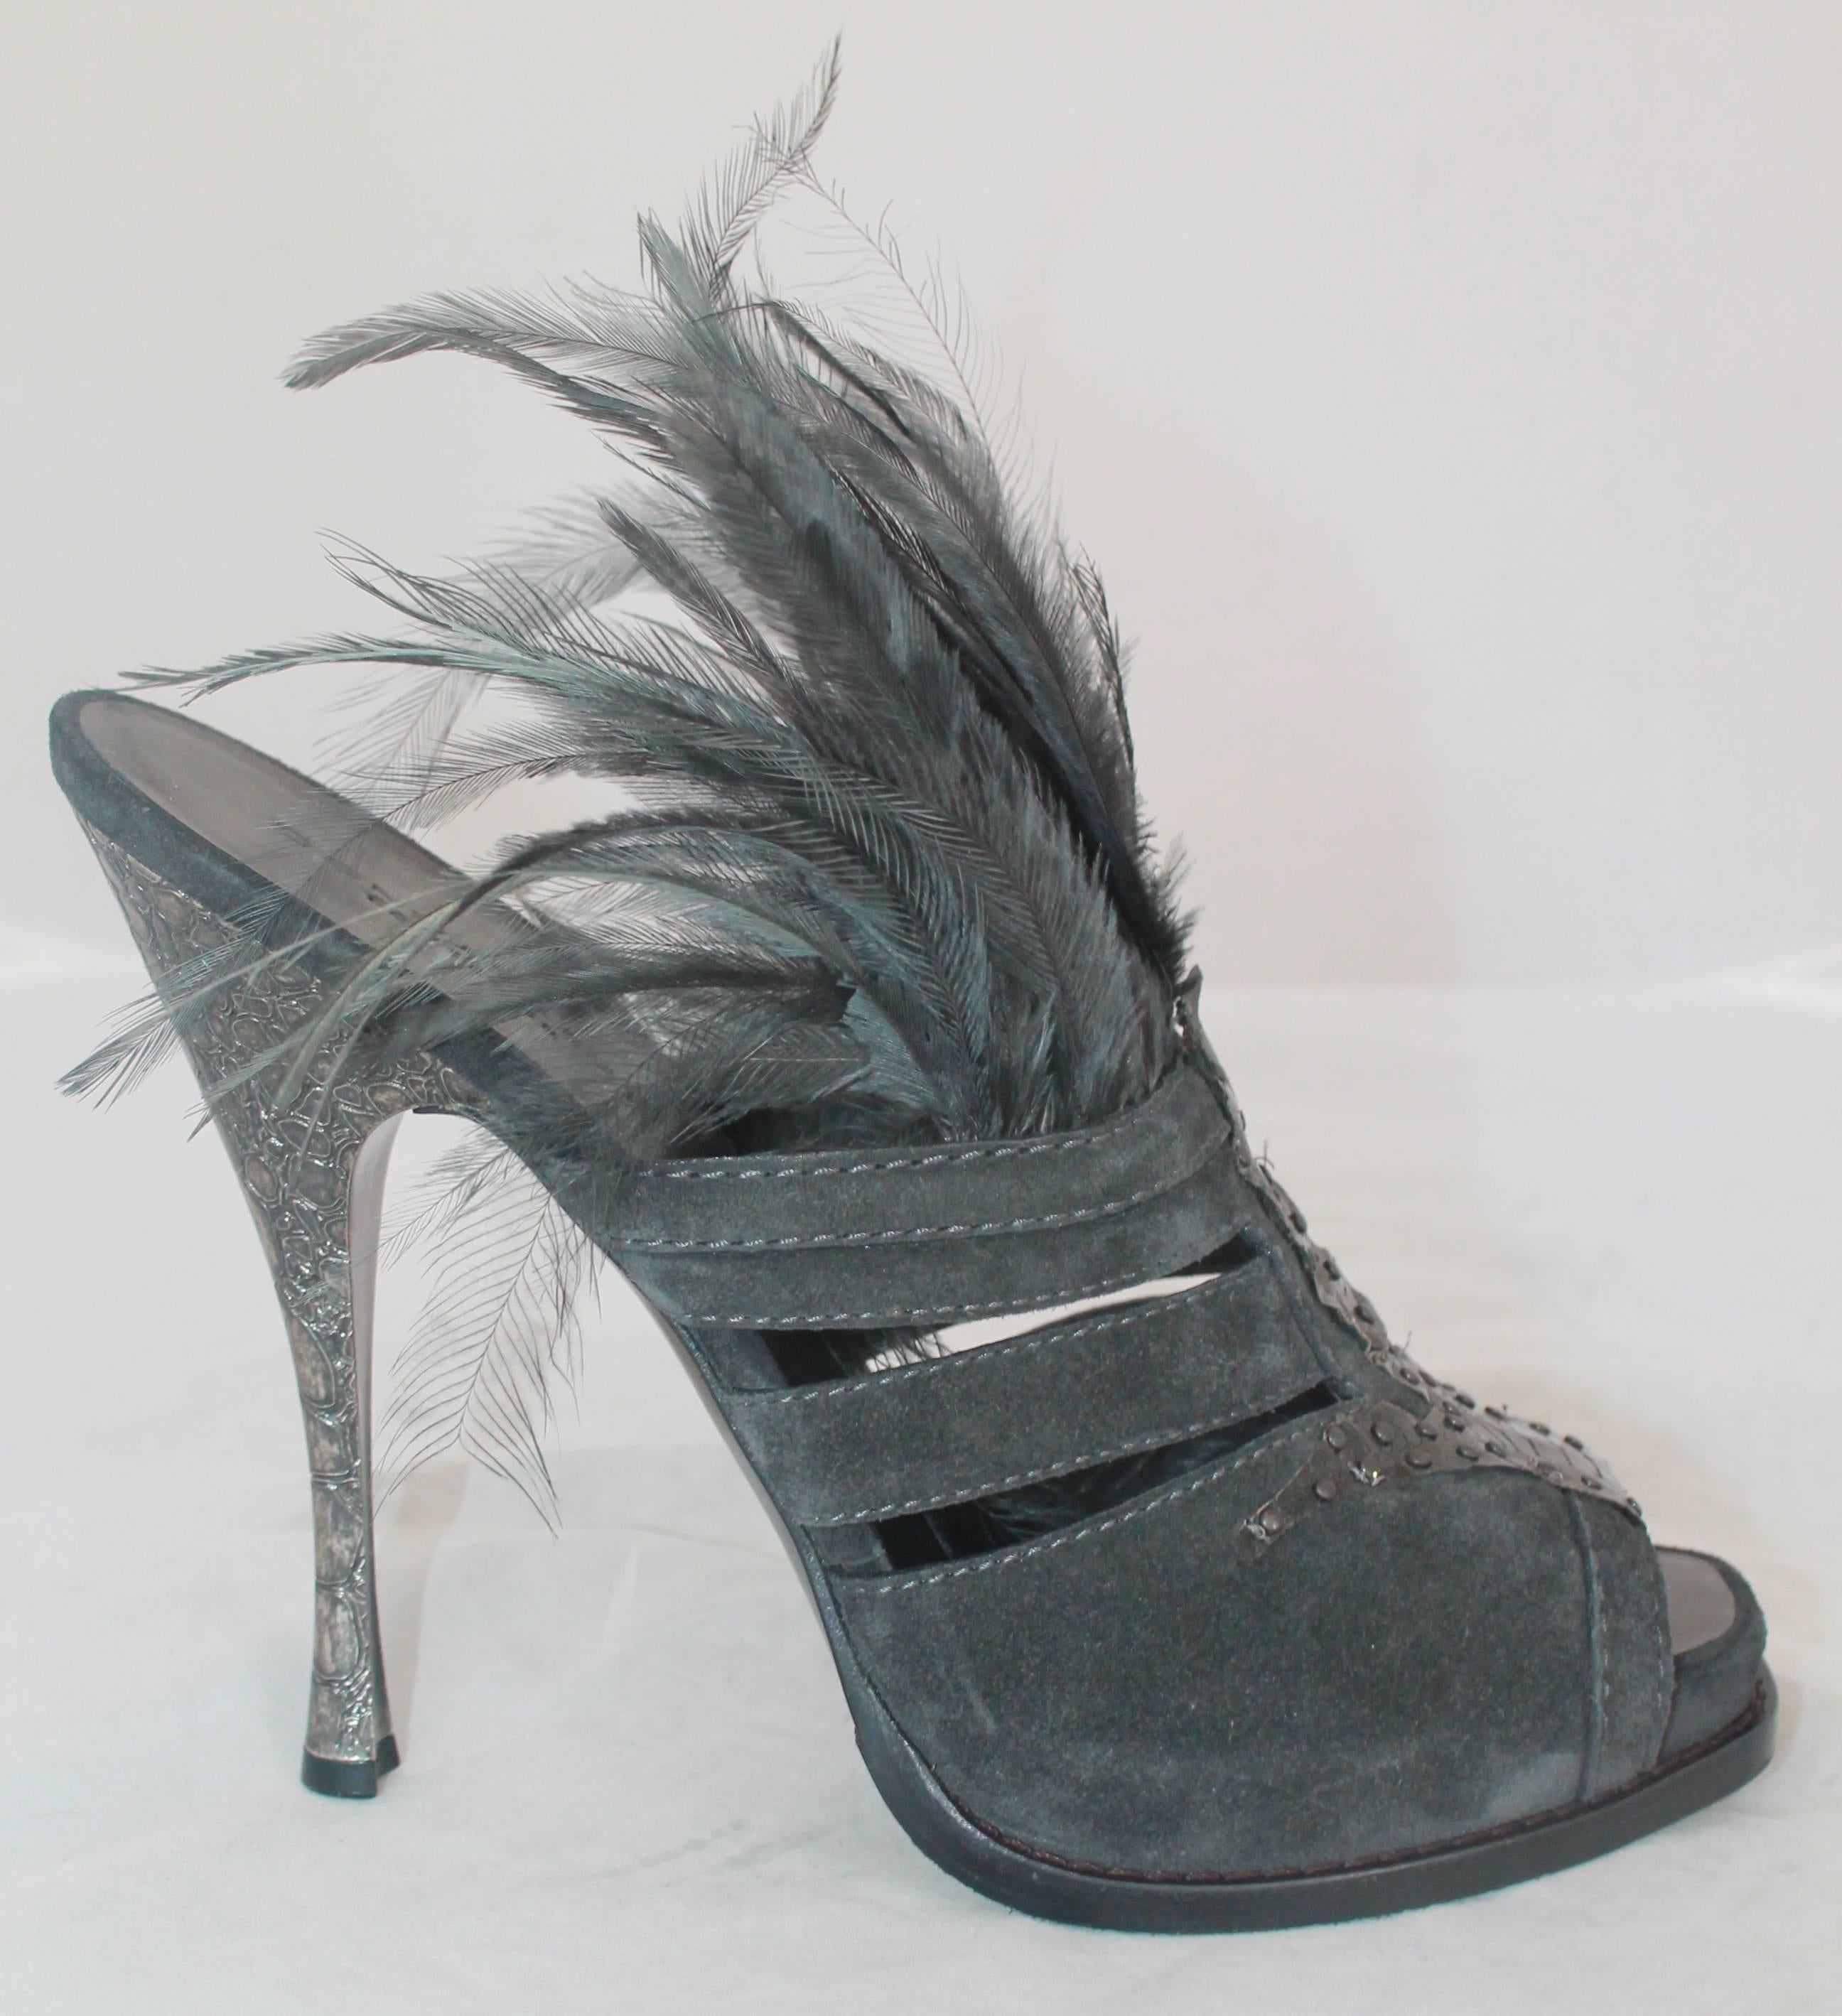 Donna Karan Collection Charcoal Suede, Snake Skin, & Feather Slide Heels - 41.  These gorgeously extravagant heels have never been worn.  They feature black snake detail, feathers on the top section, and embossed croc metal heels.  These are a very